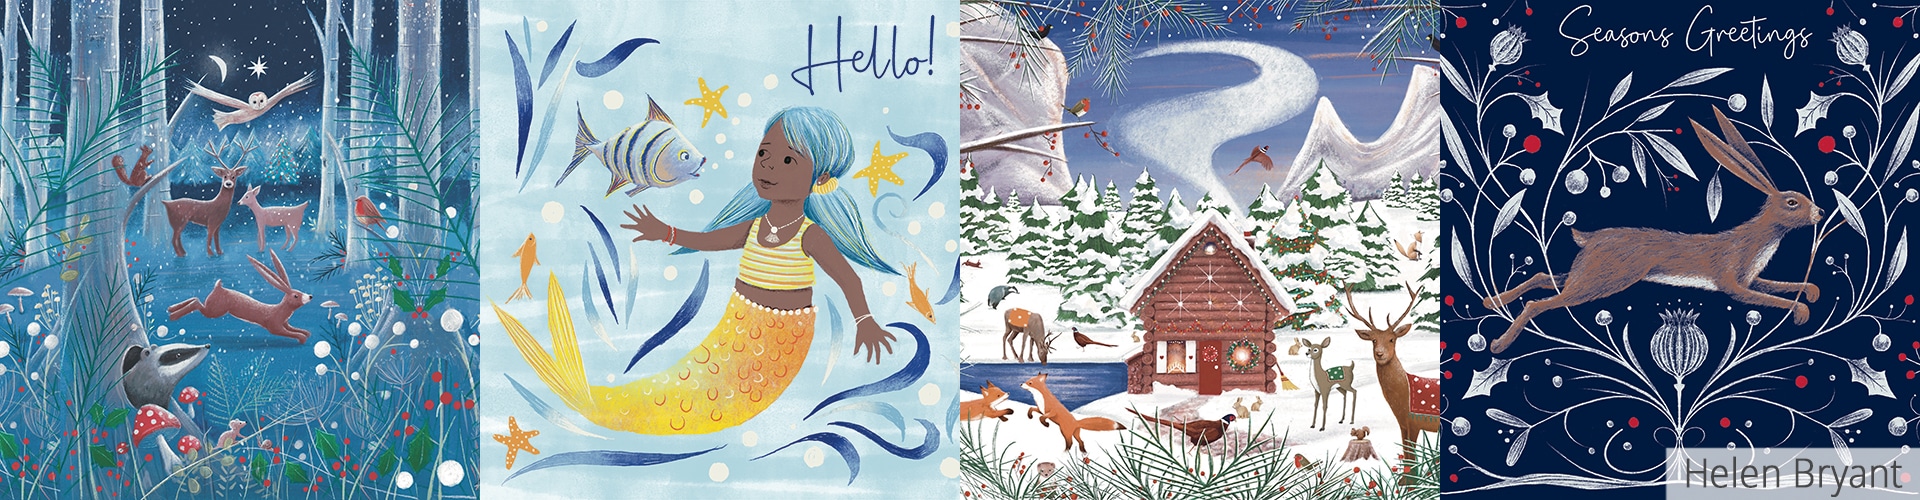 Helen Bryant artist various Christmas and everyday greeting card illustrations for art licensing